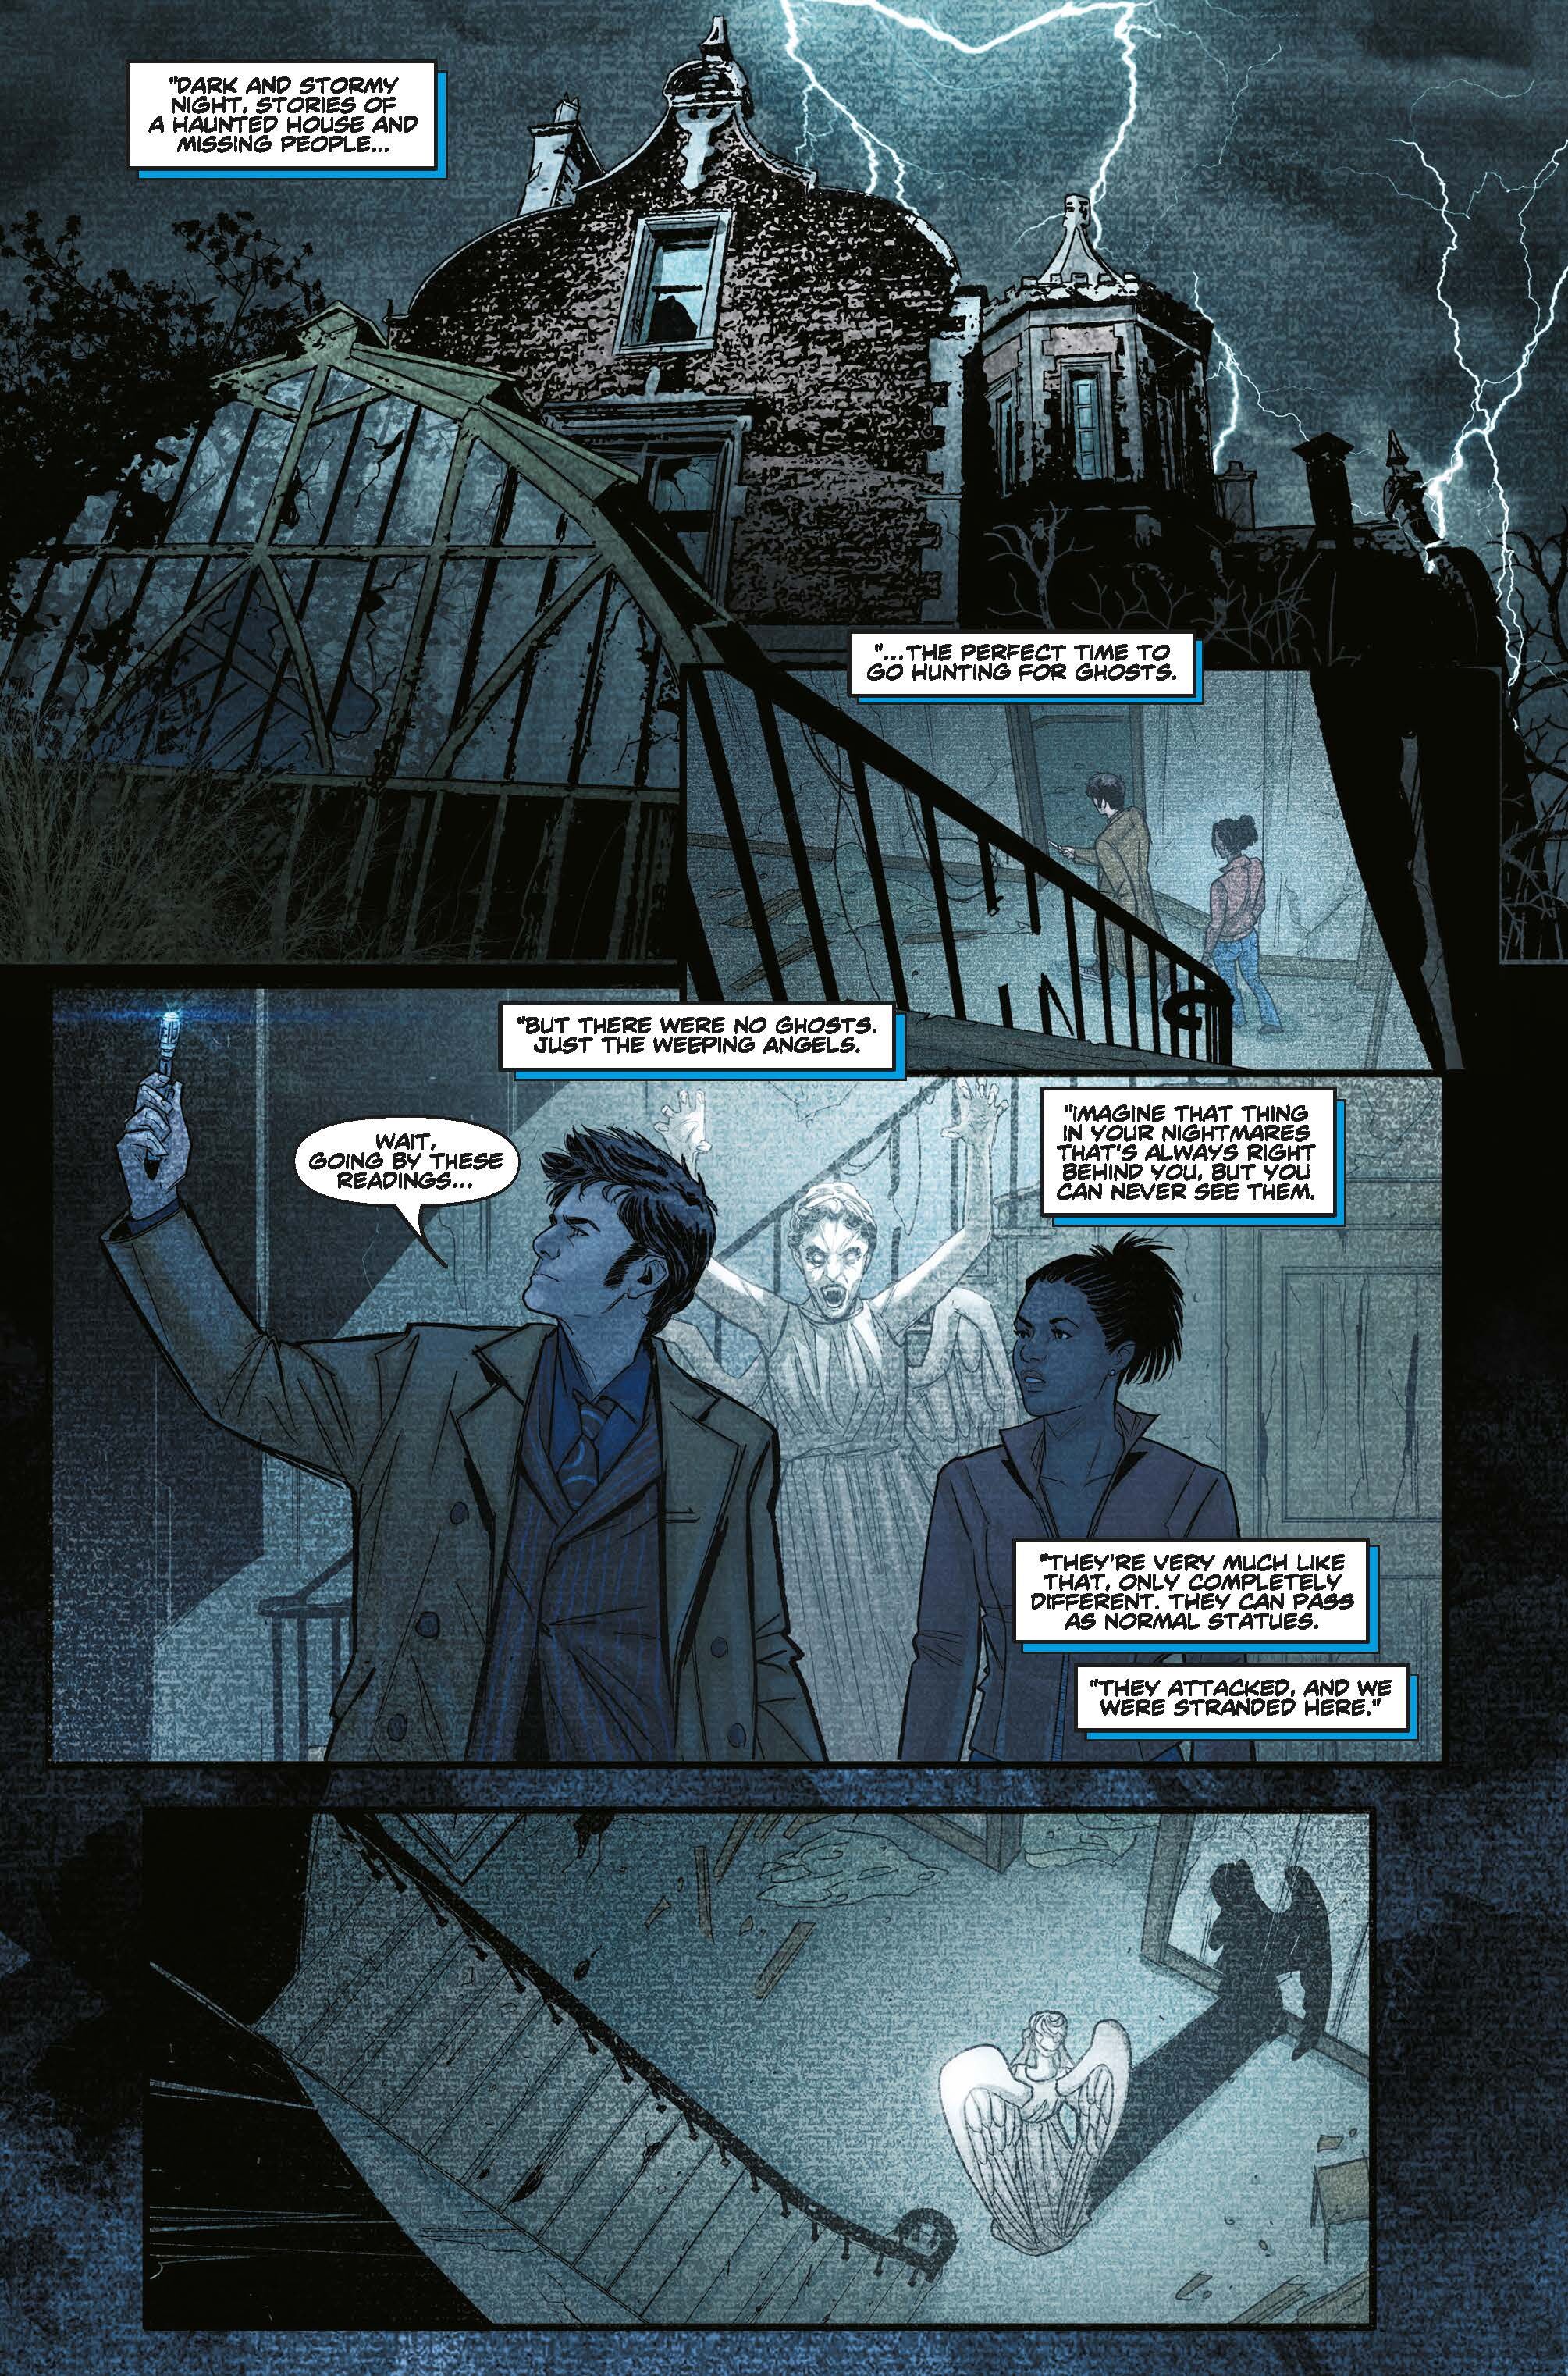 DW13DY2_1 Interior_Page_1